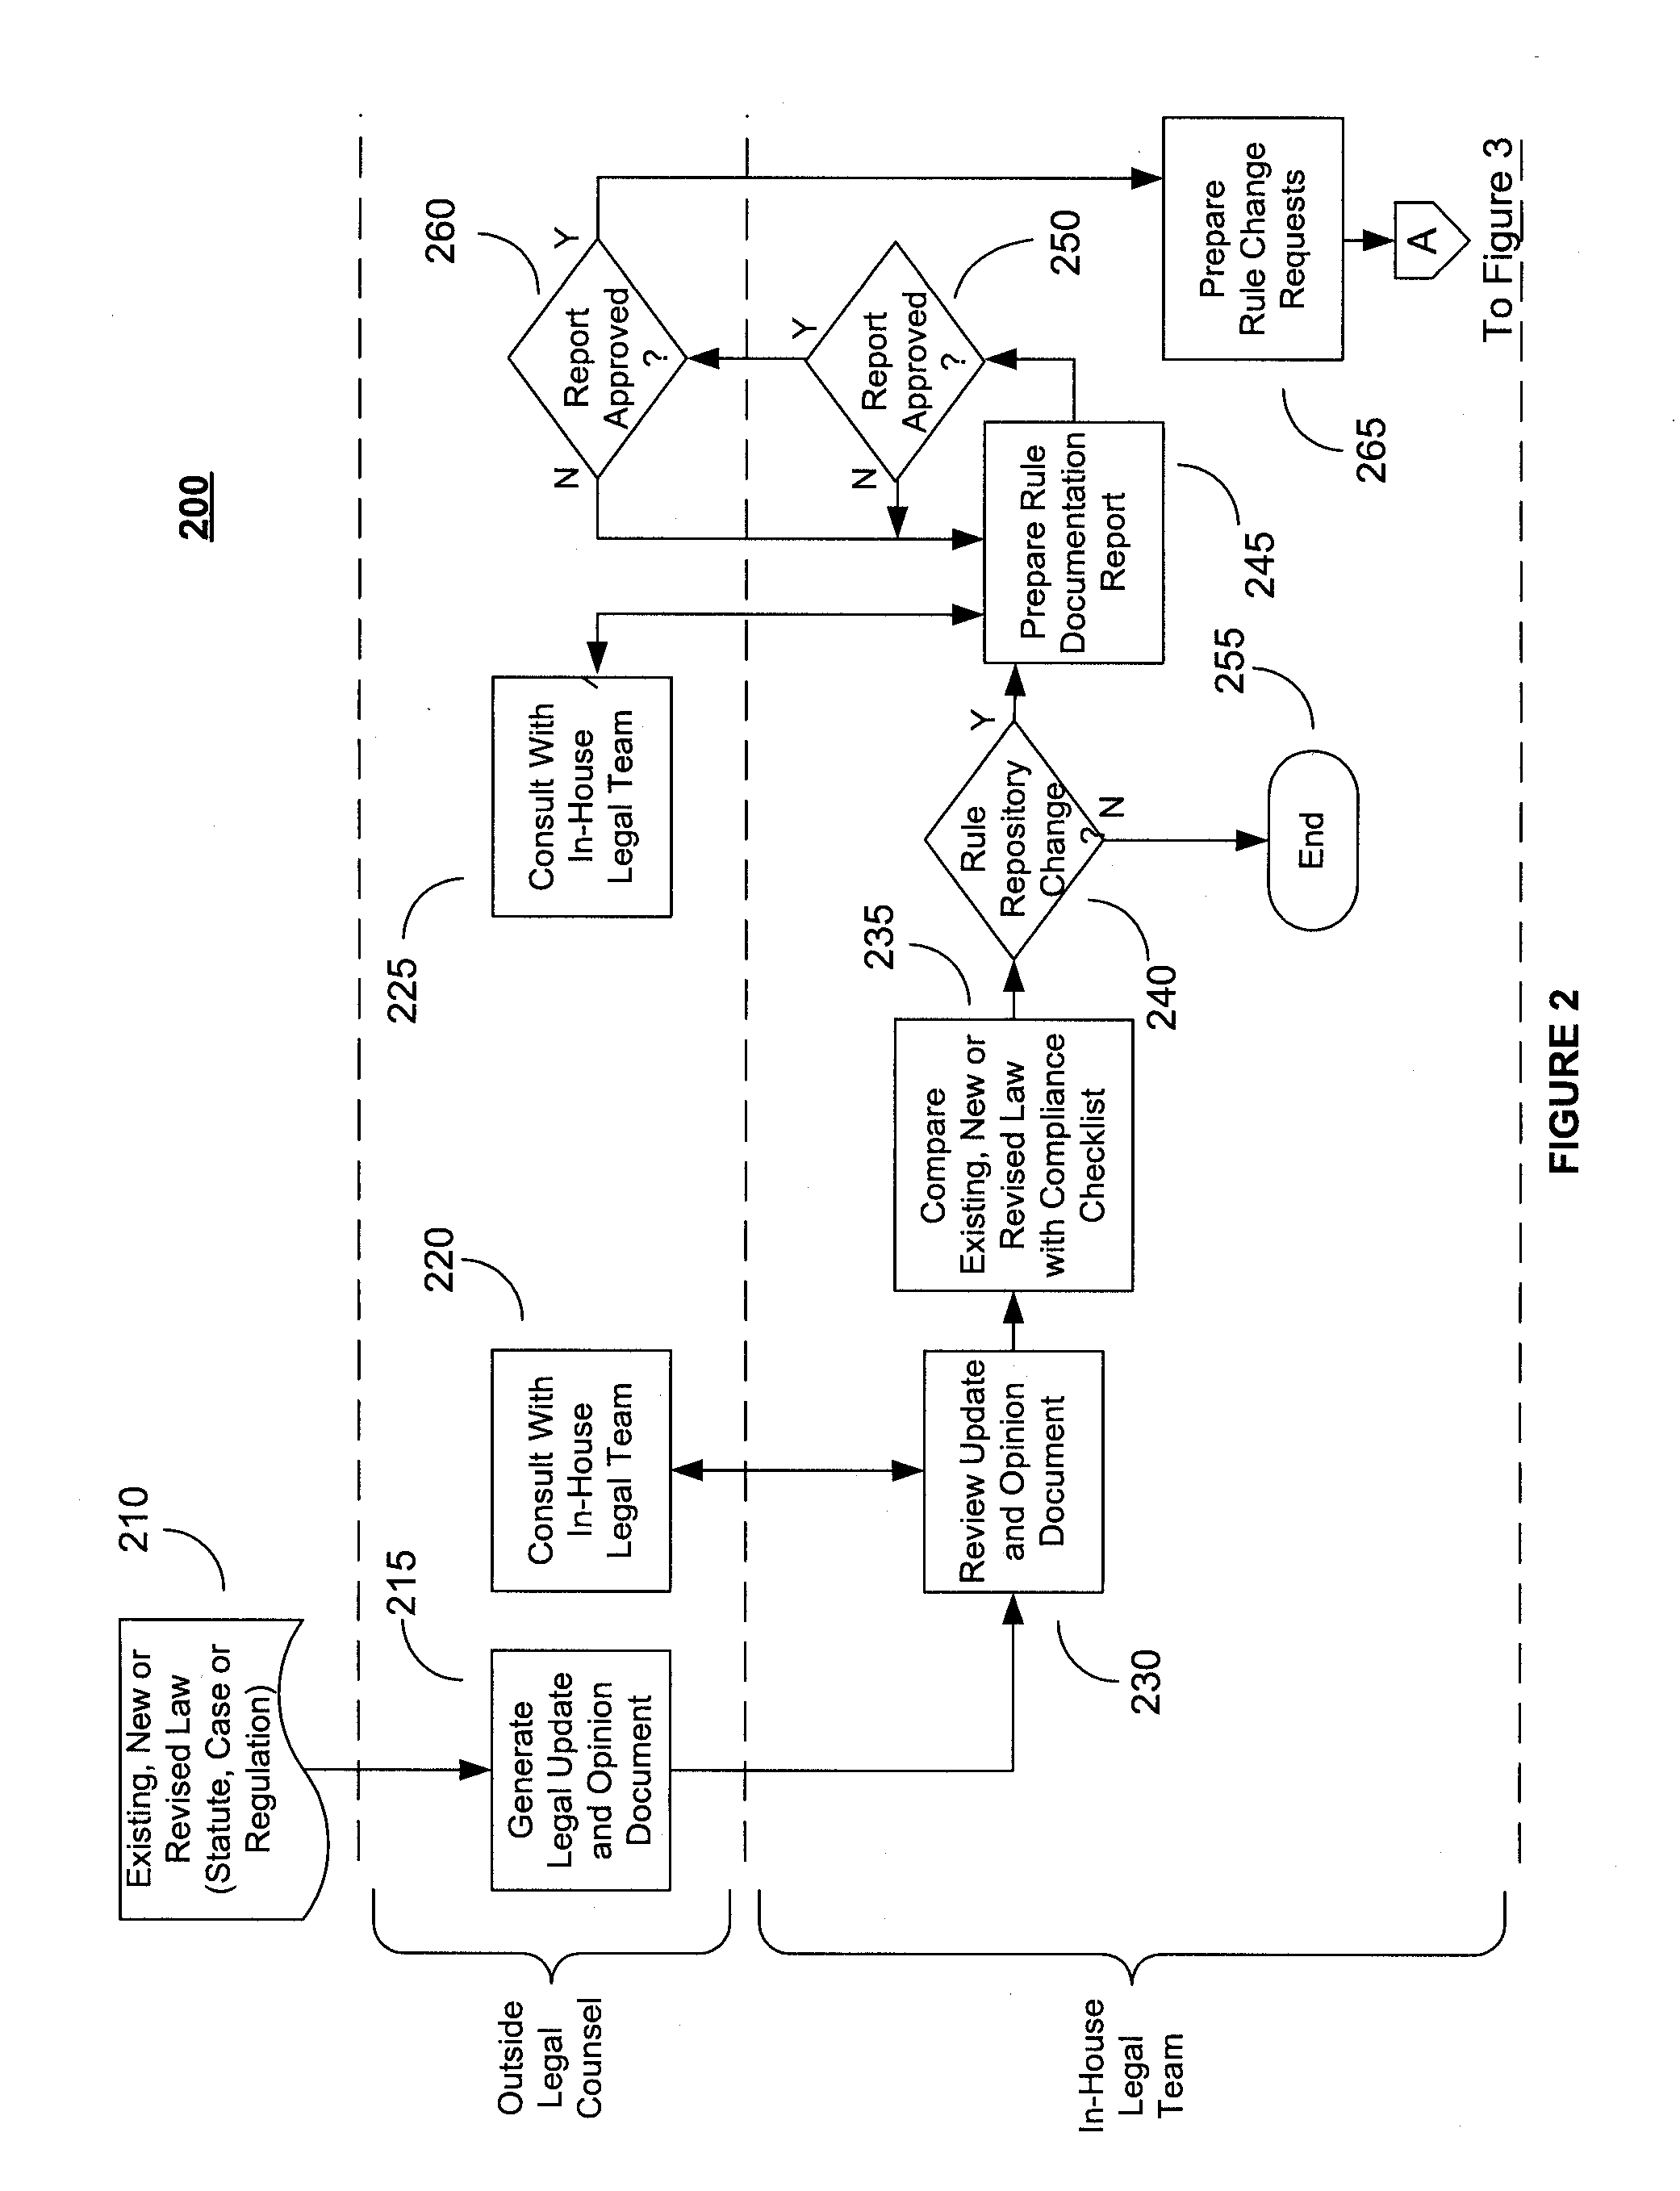 System and Method for Regulatory Rules Repository Generation and Maintenance